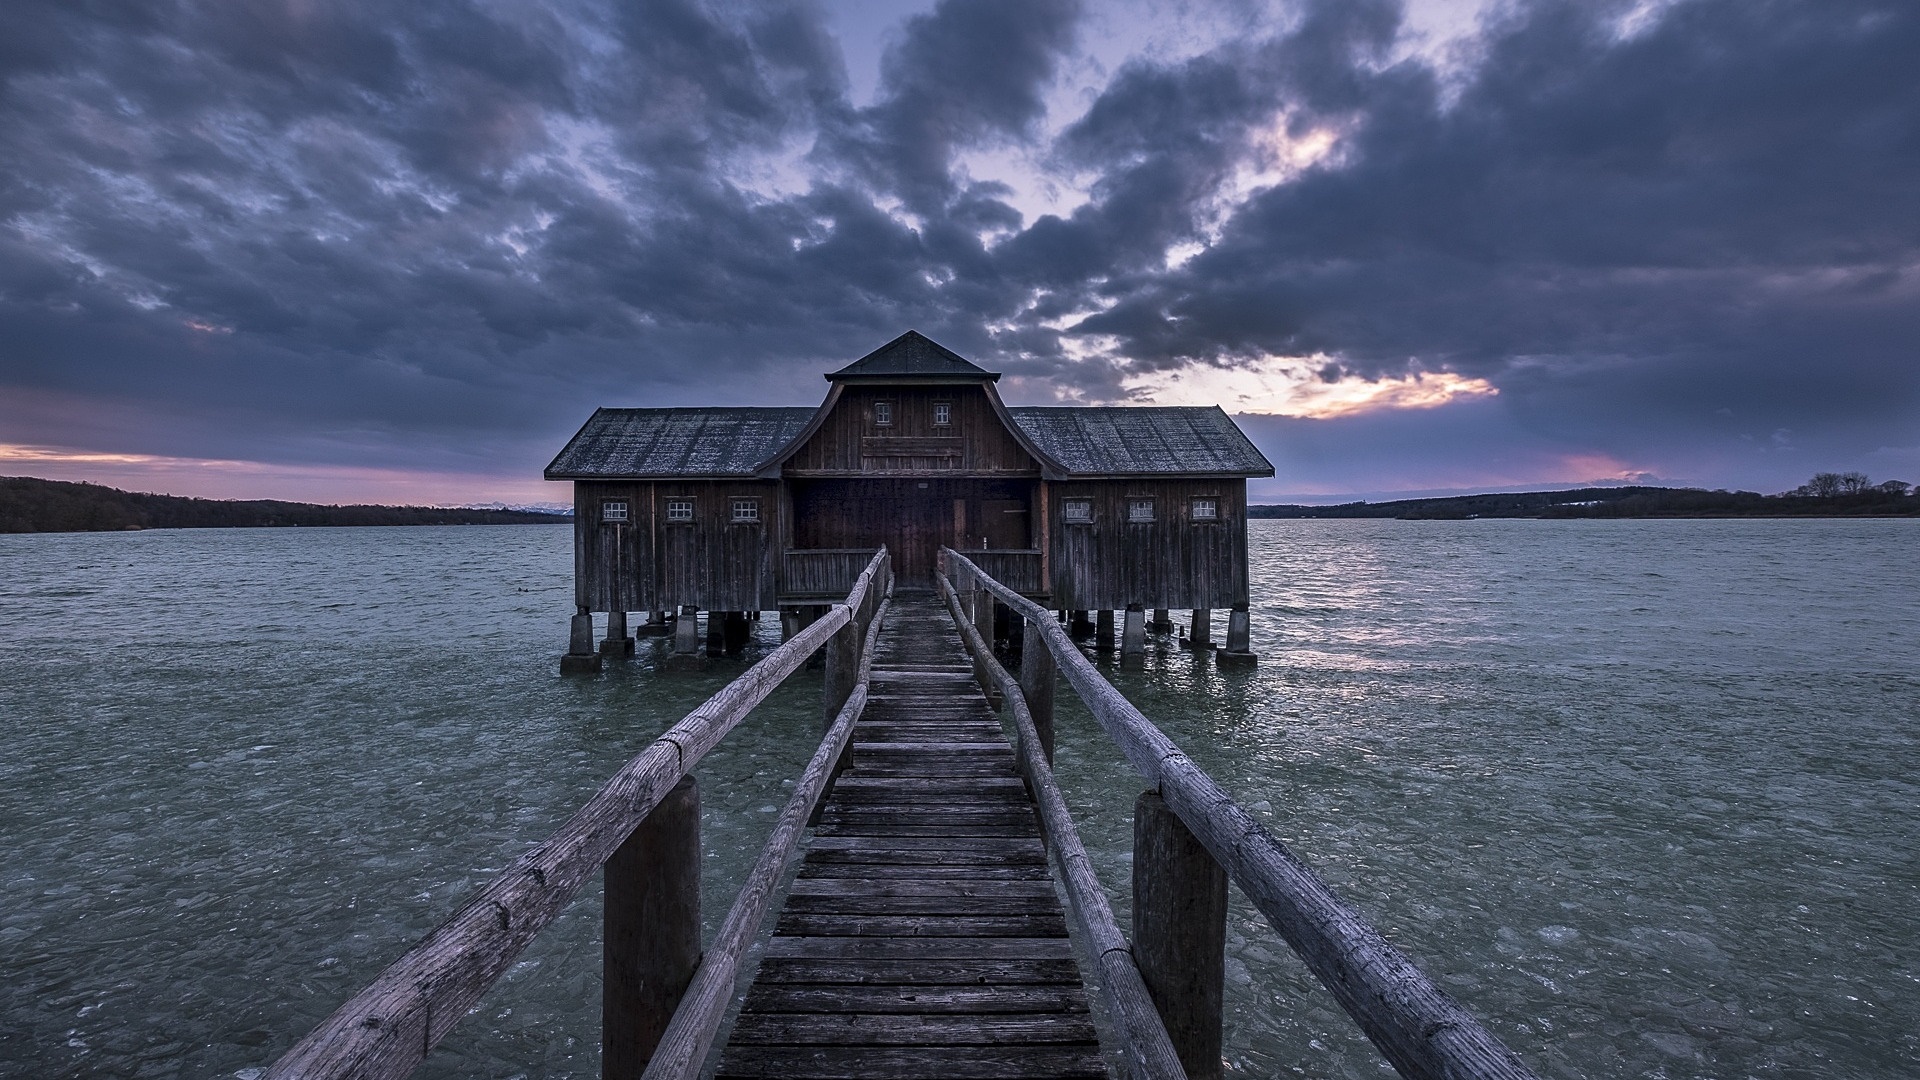 Dark Clouds over Boathouse Pier by Thomas Weiler